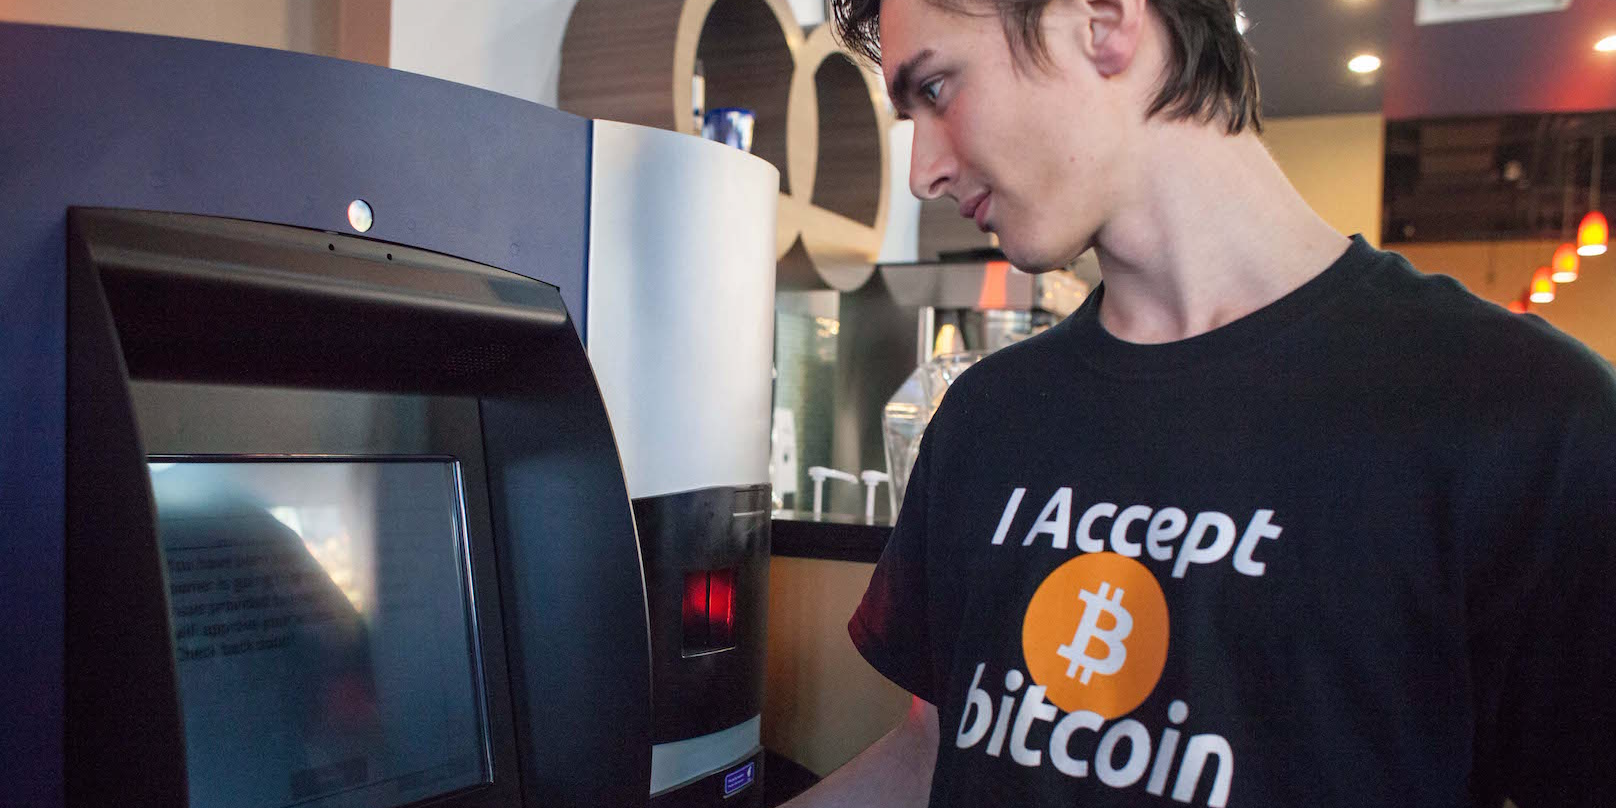 Gabriel Scheare uses the world's first bitcoin ATM on October 29, 2013 at Waves Coffee House in Vancouver, British Columbia. Scheare said he 'just felt like being part of history.' The ATM, named Robocoin, allows users to buy or sell the digital currency known as bitcoins. Once only used for black market sales on the internet, bitcoins are starting to be accepted at a growing number of businesses. (Photo by )